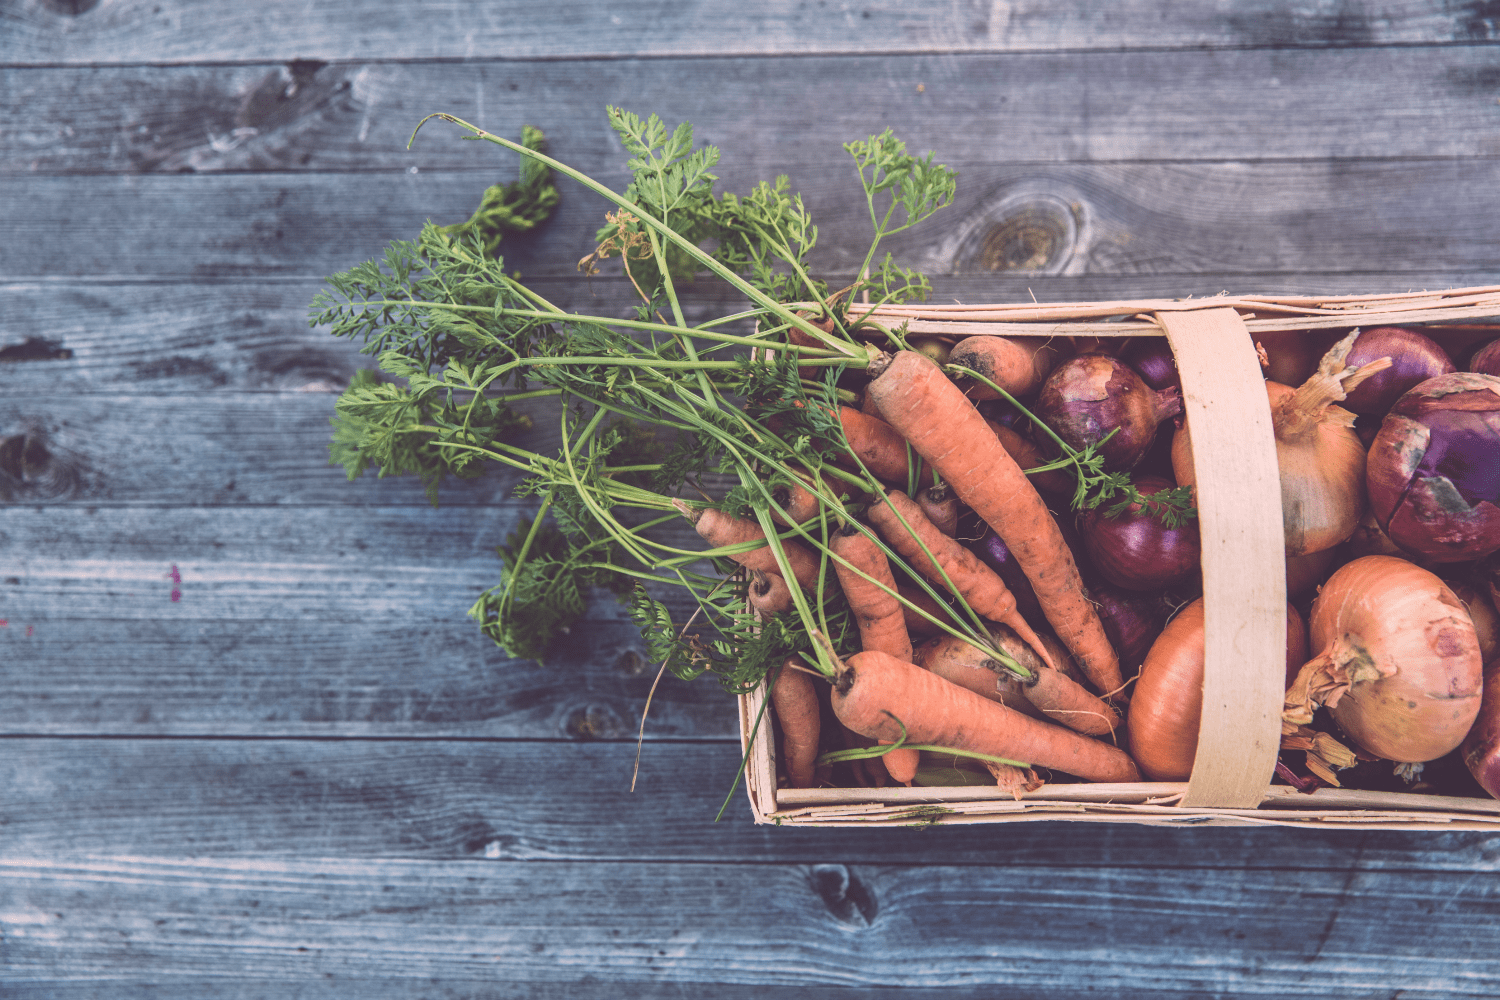 Freshly picked carrots and onions in a basket.